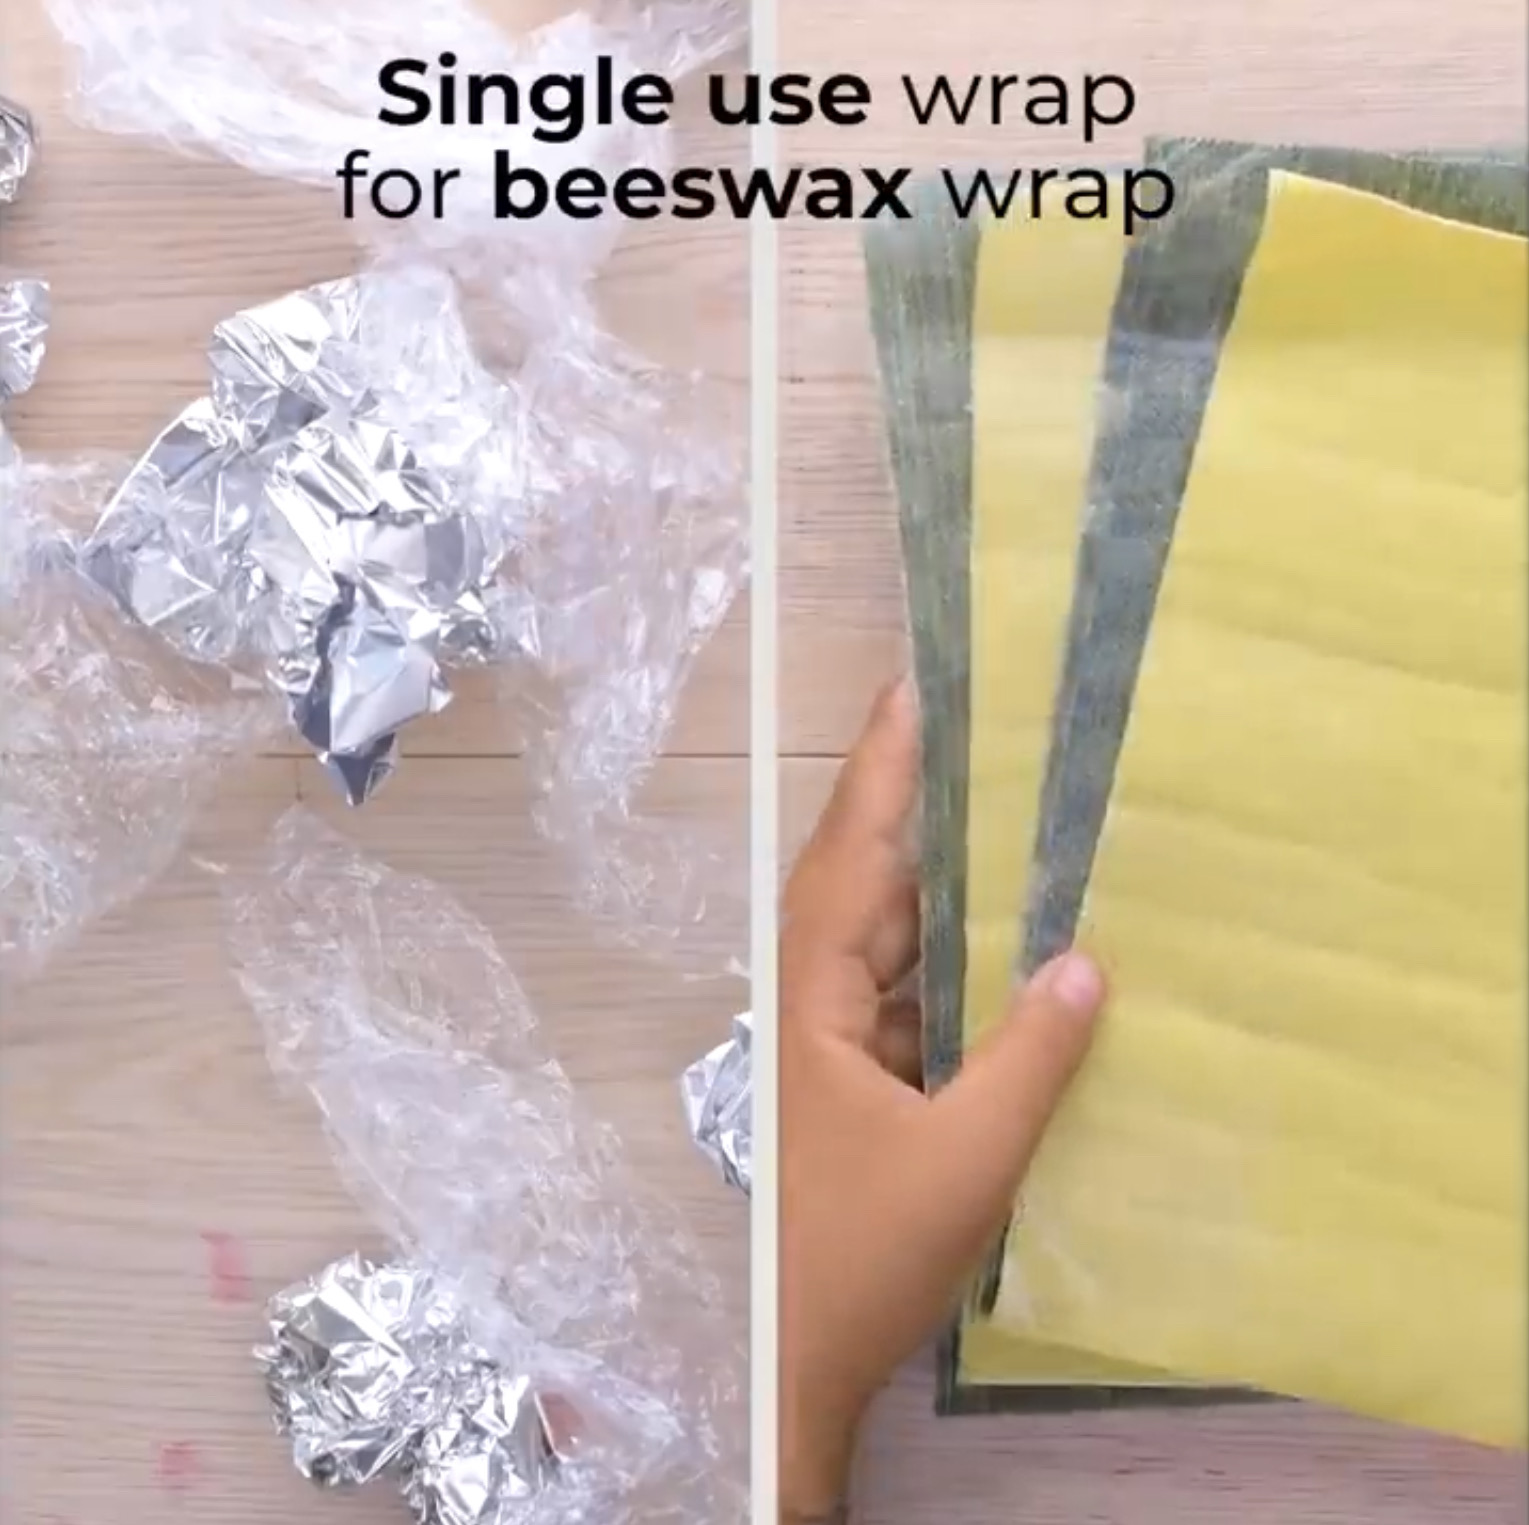 Beeswax wrap or reusable silicone sandwich bags are readily available.